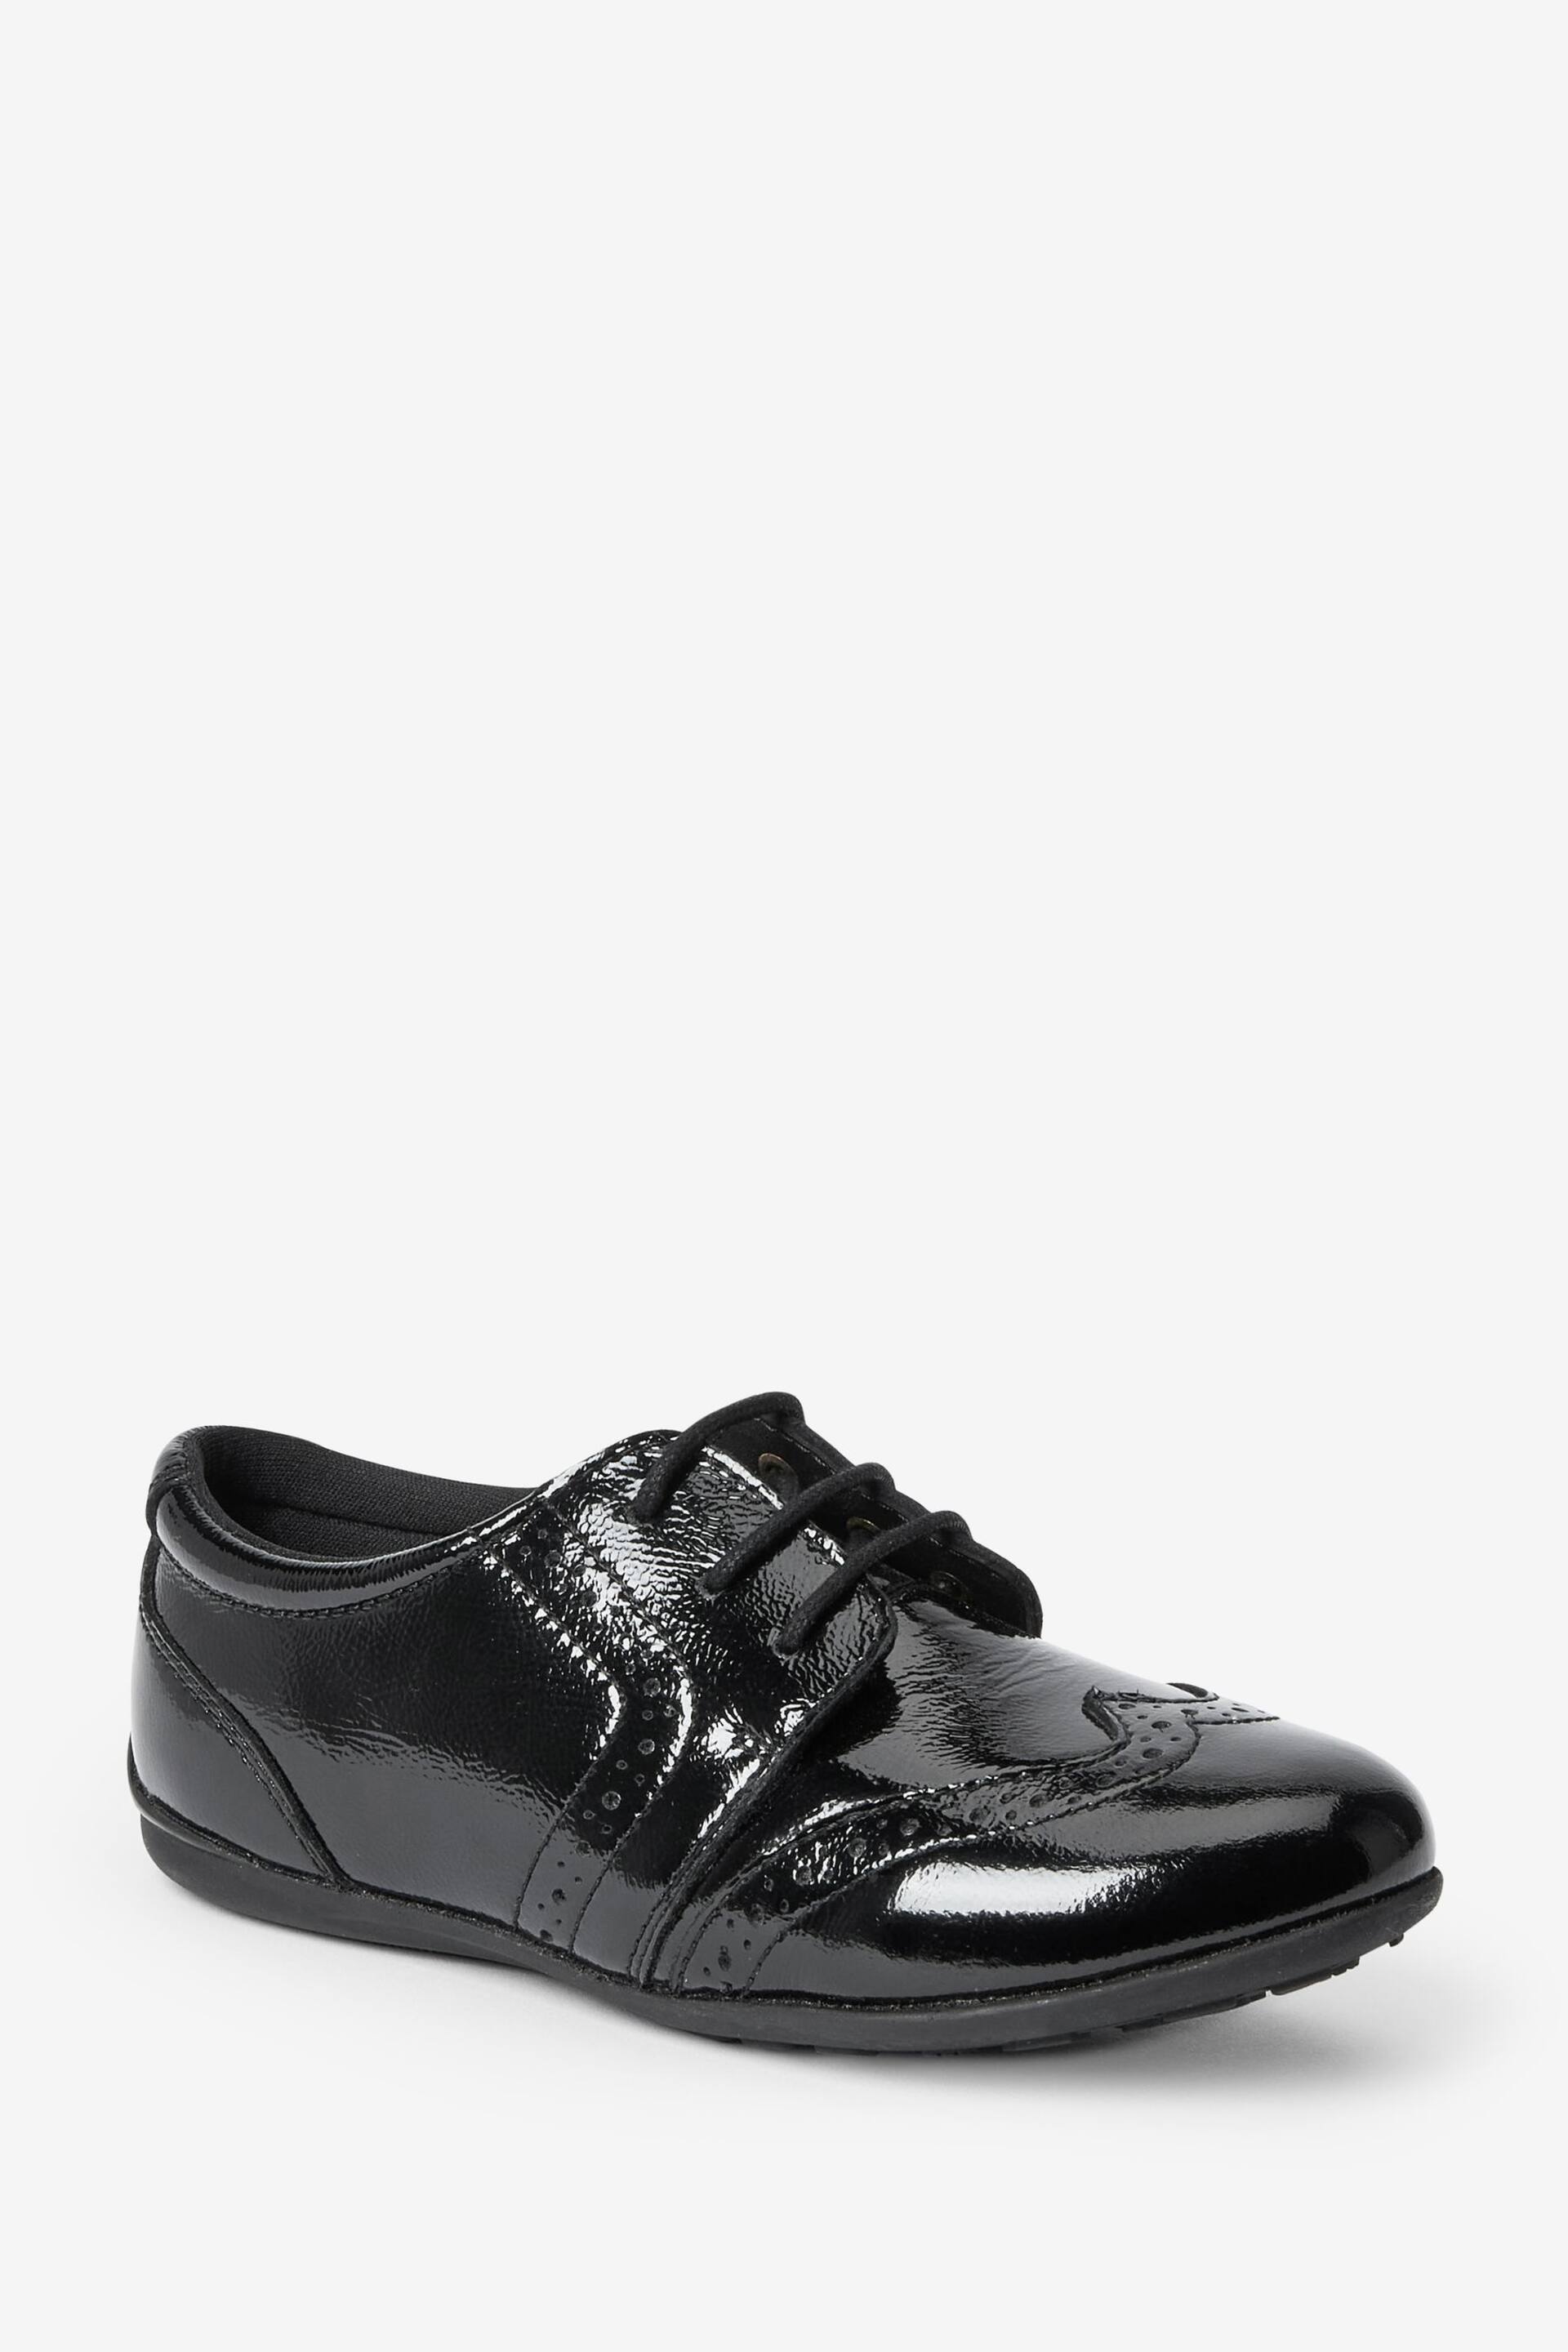 Black Patent Standard Fit (F) School Leather Lace-Up Brogues - Image 4 of 9